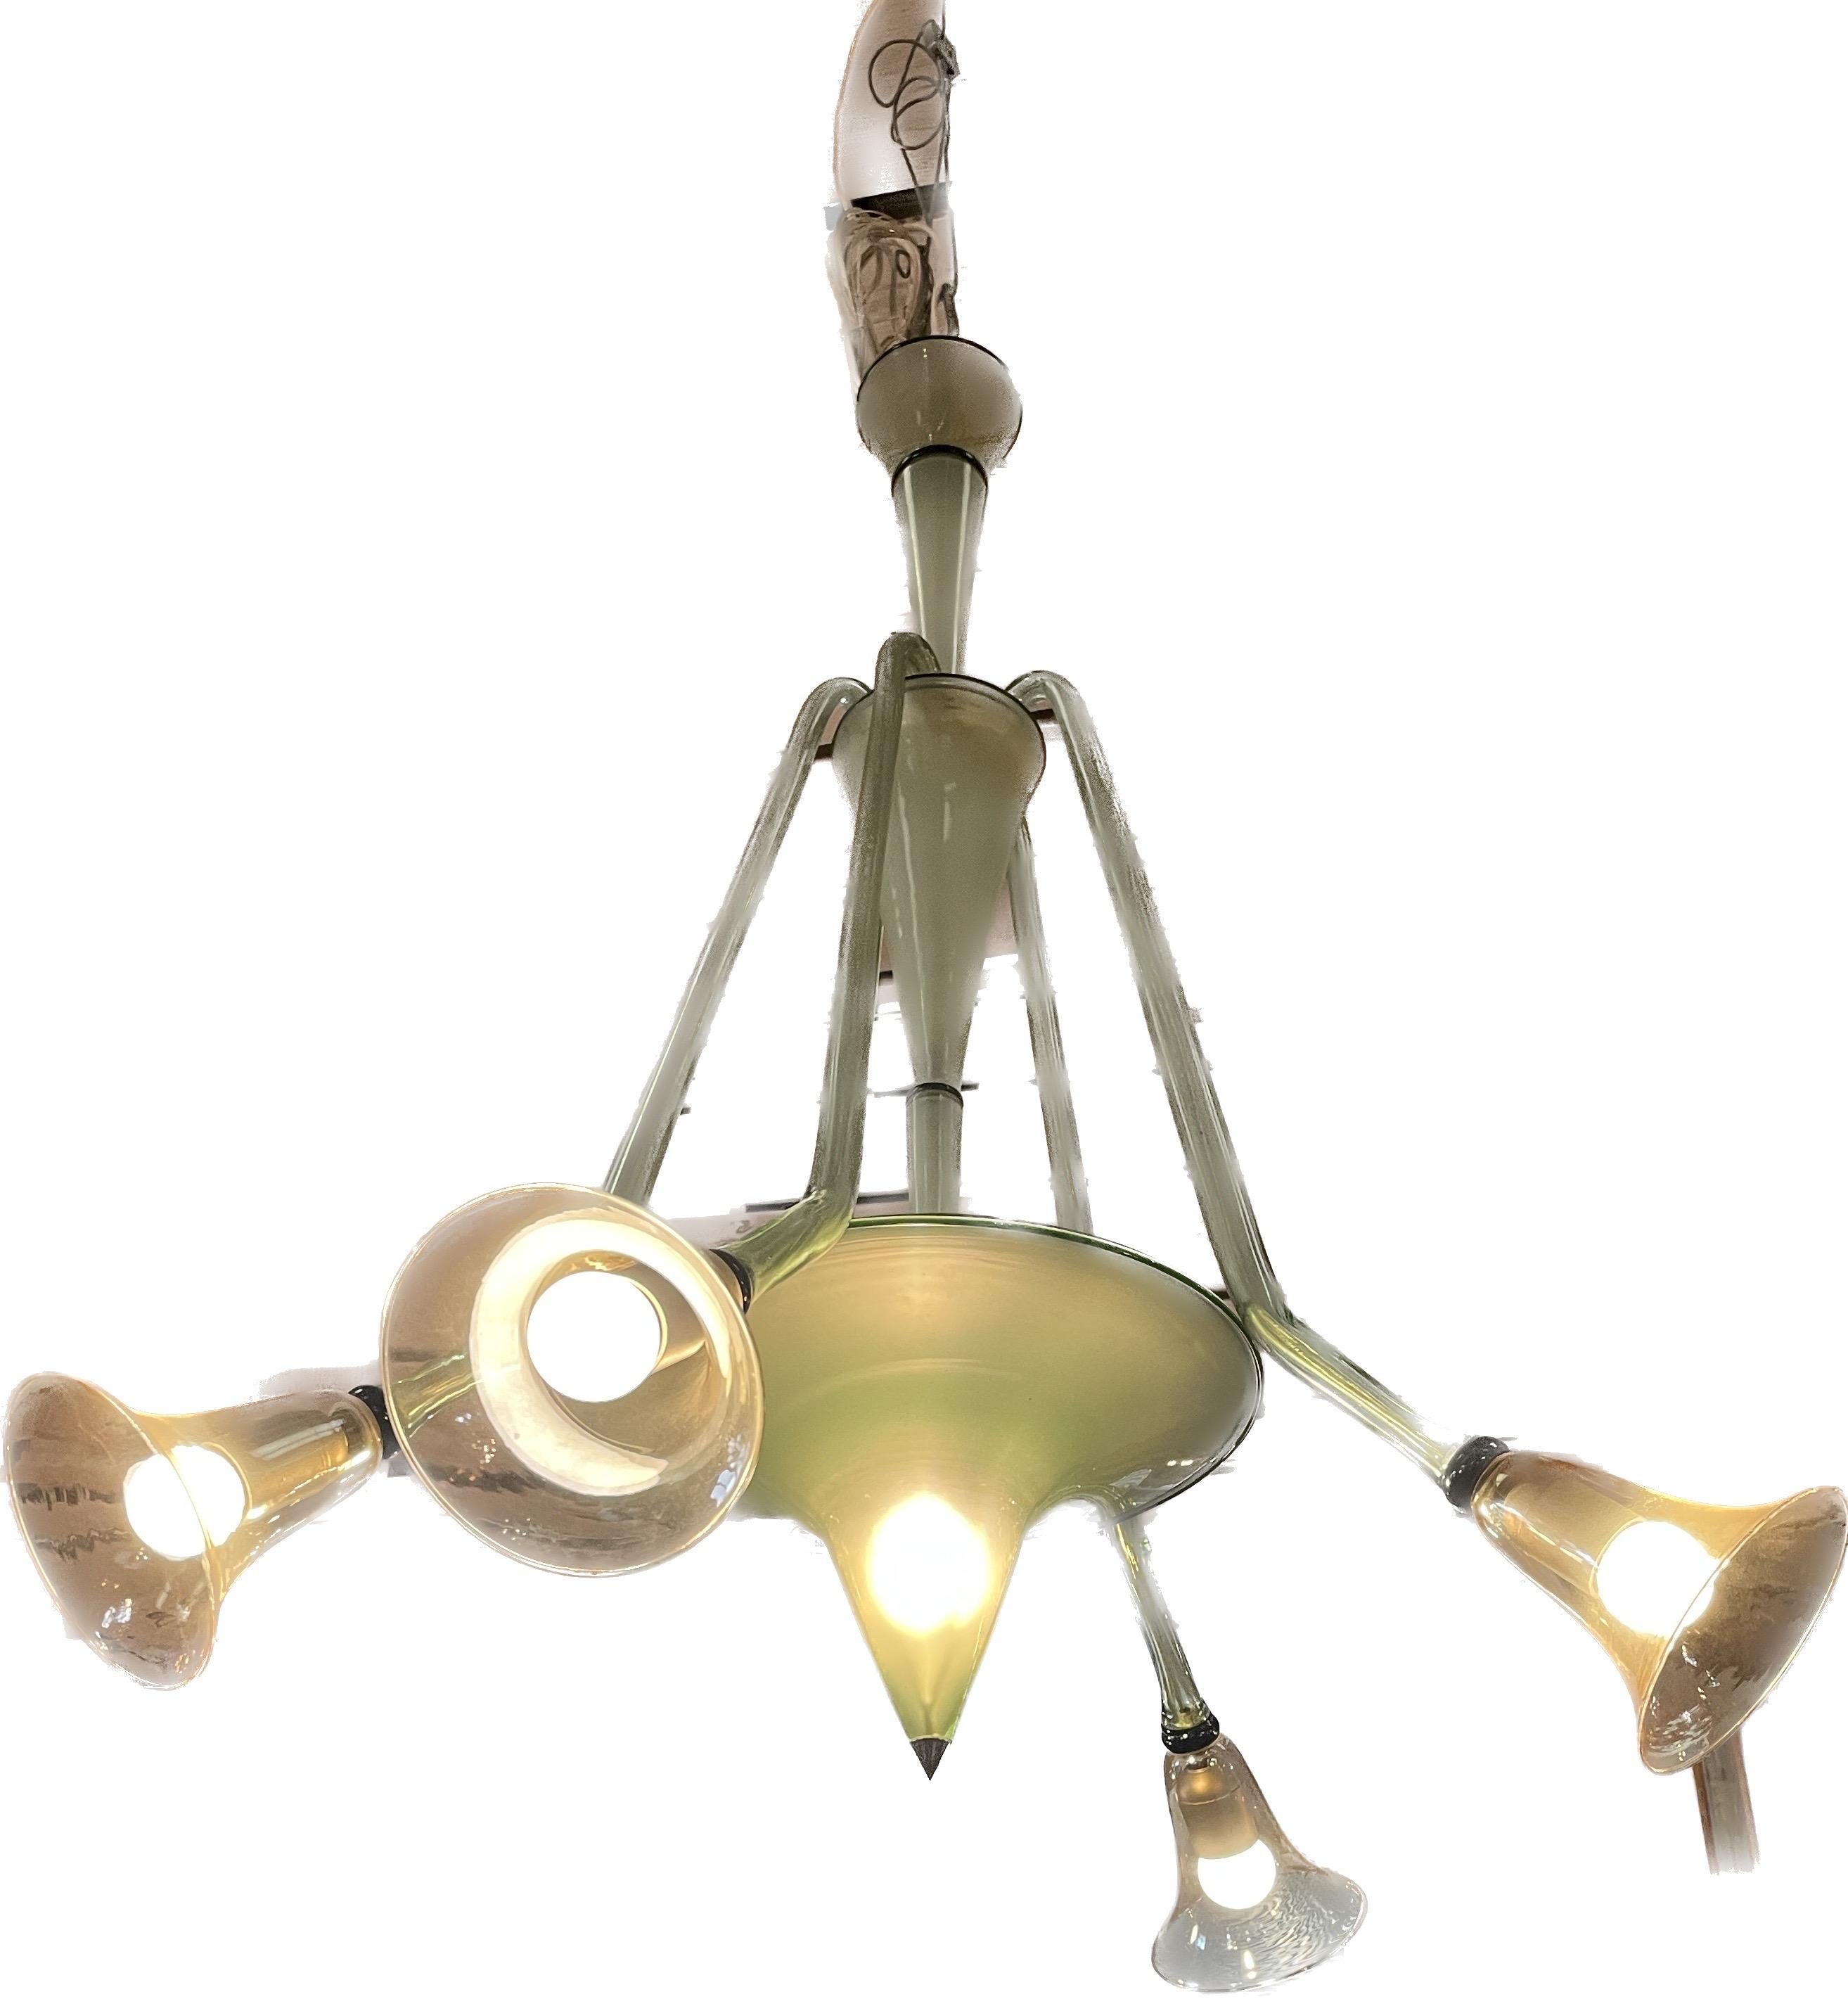 Hand-Crafted Murano Glass Fratelli Toso Pendant Chandelier With 5 Arms For Sale